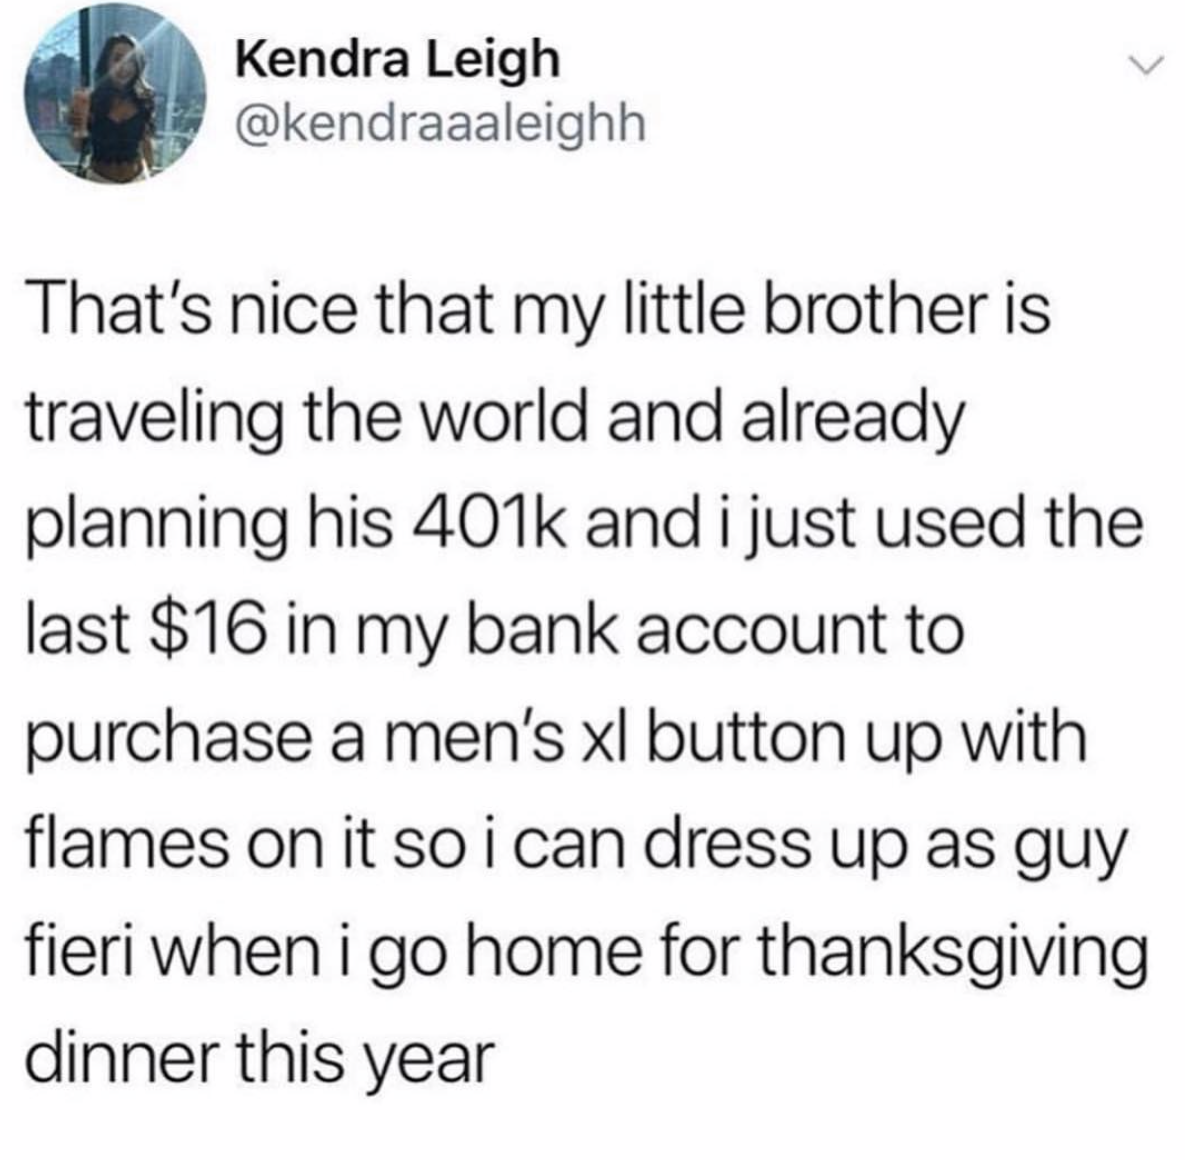 team dad bod - Kendra Leigh That's nice that my little brother is traveling the world and already planning his and i just used the last $16 in my bank account to purchase a men's xl button up with flames on it so i can dress up as guy fieri when i go home